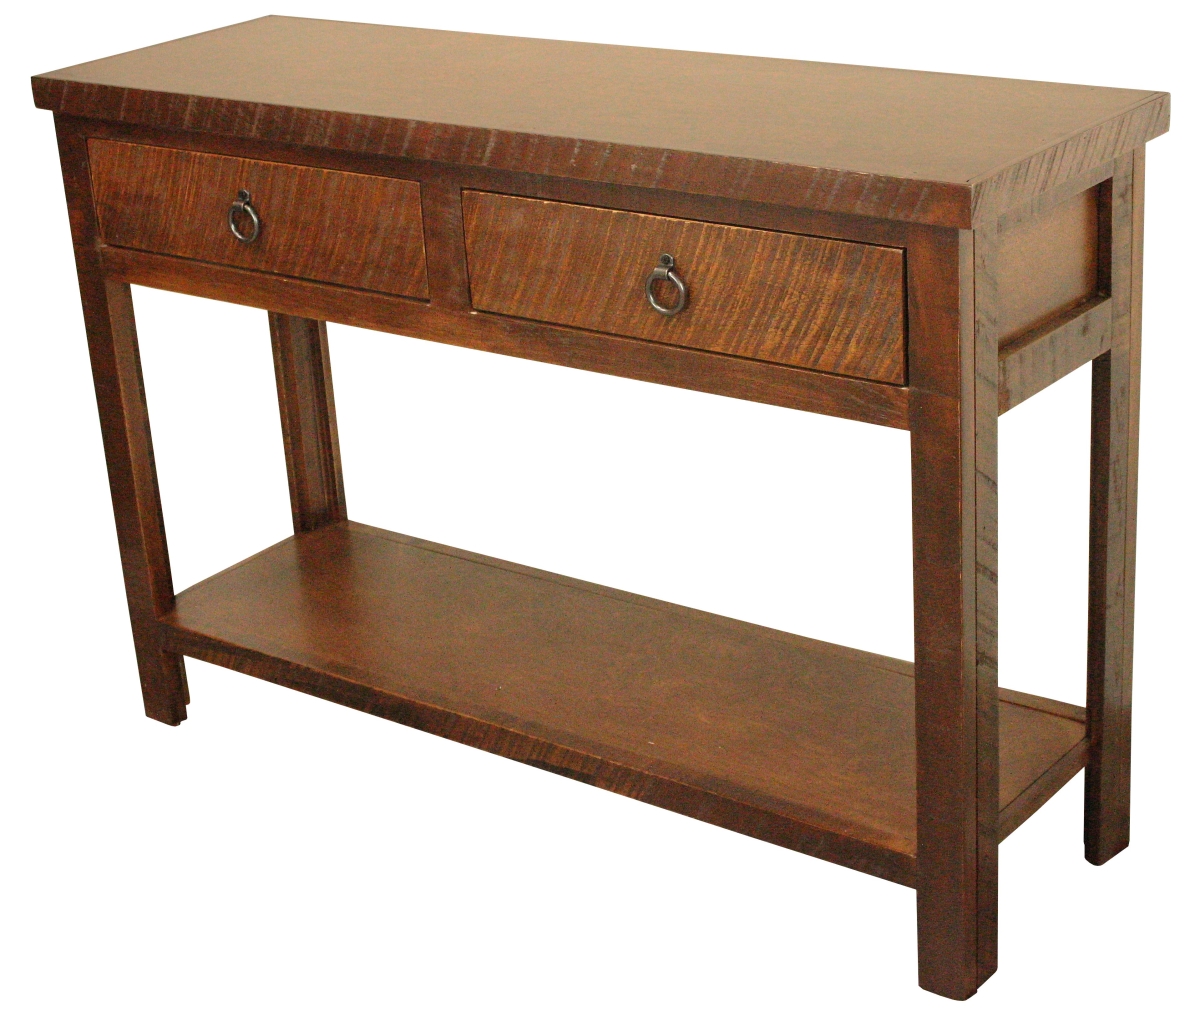 Picture of American Heartland 37305HG Rustic Promo Sofa Table in Havana Gold